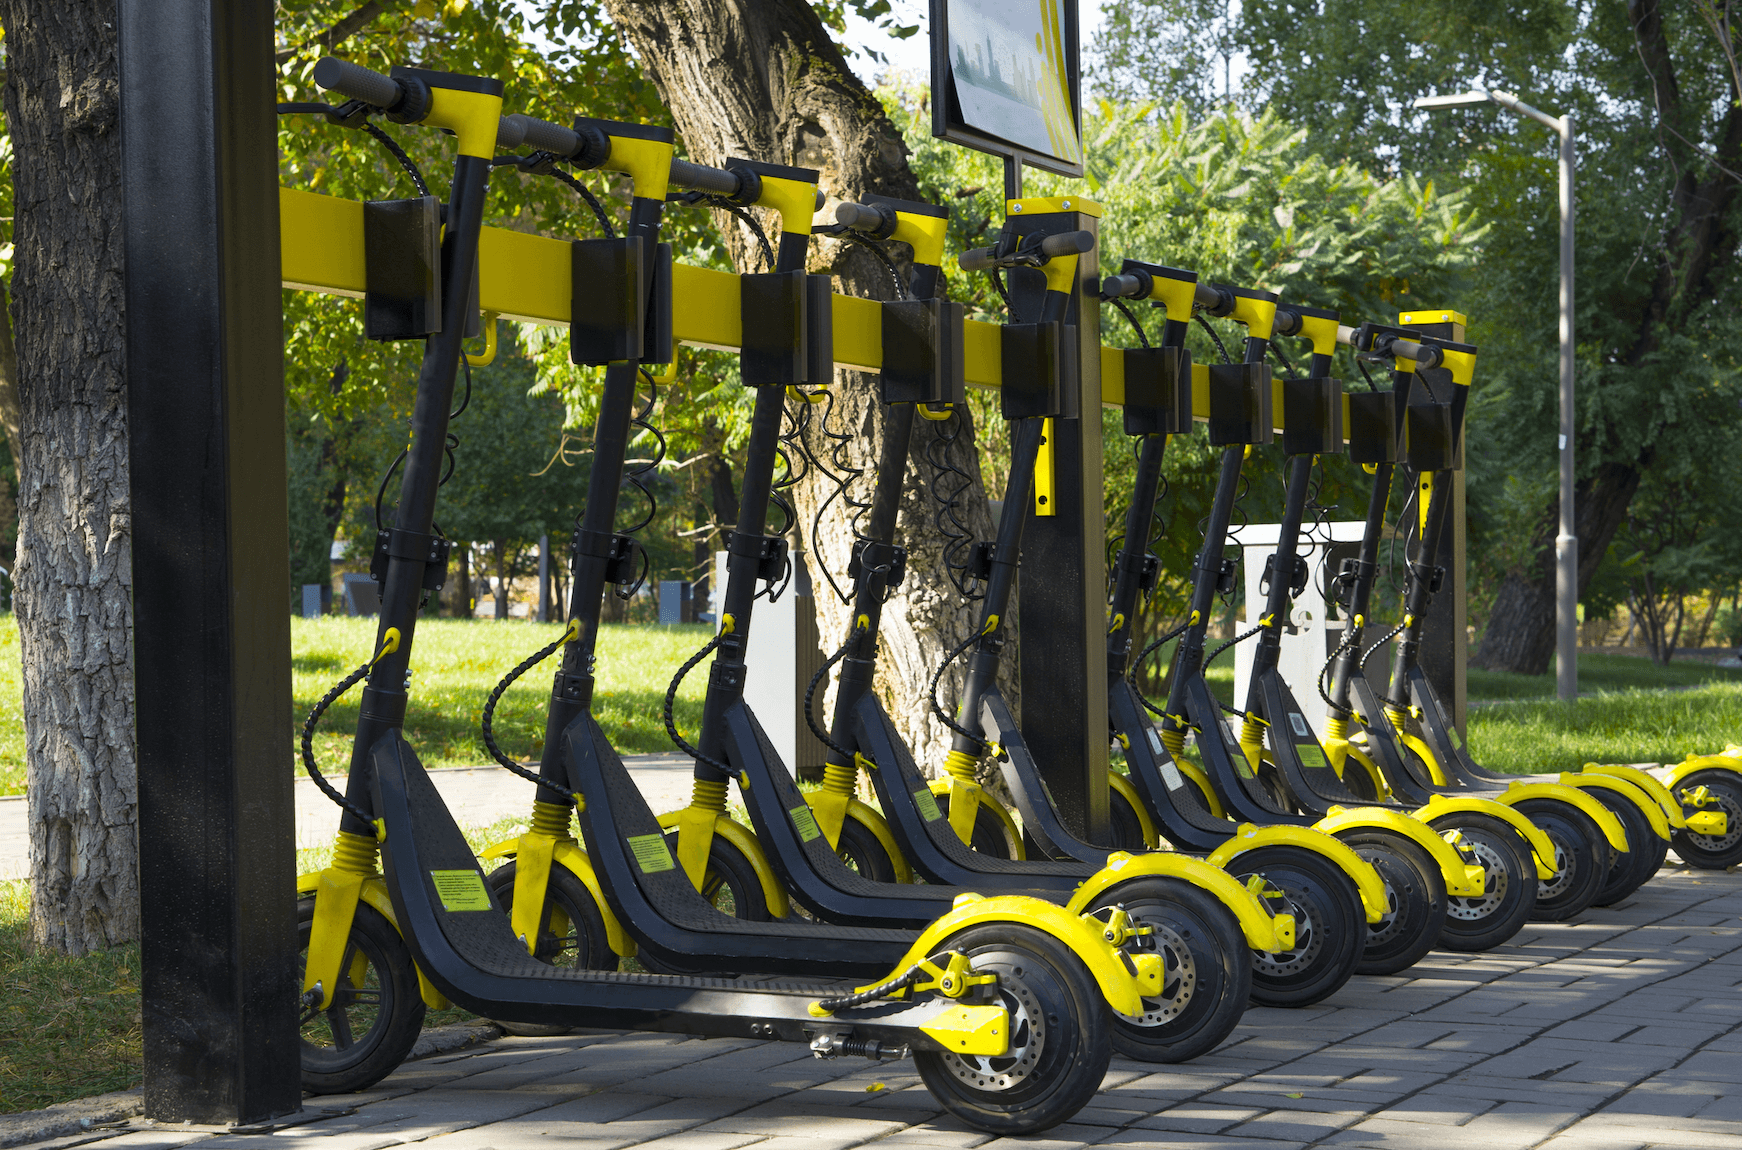 Parking for electric scooters for rent